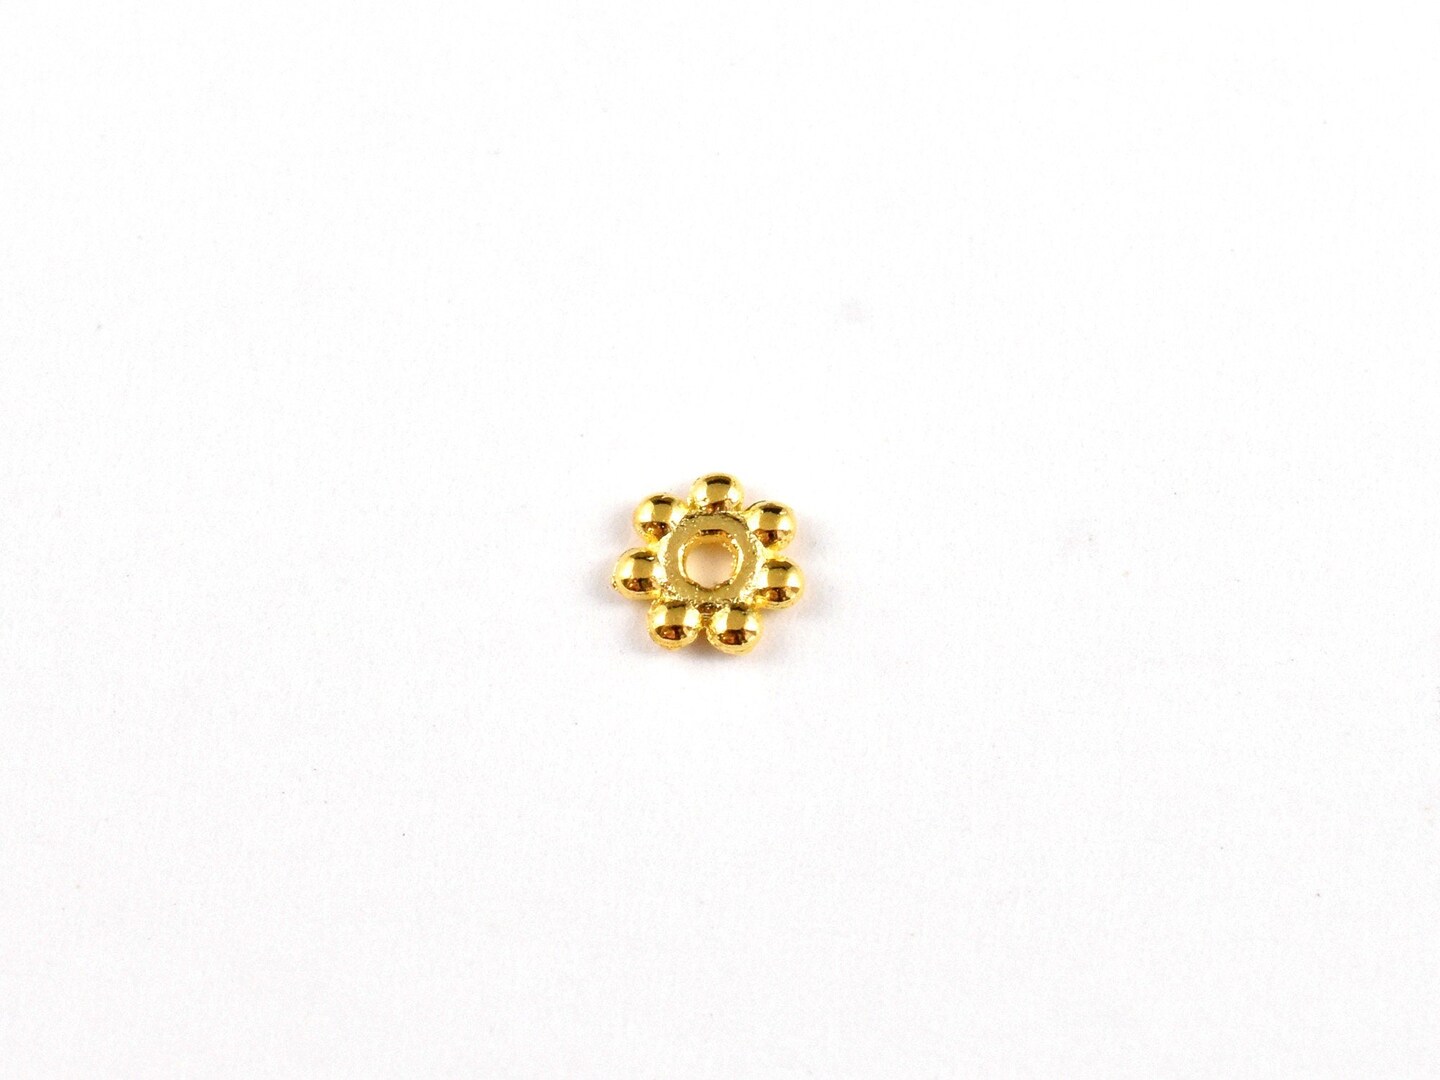 *250* 4mm Gold Daisy Spacer Beads